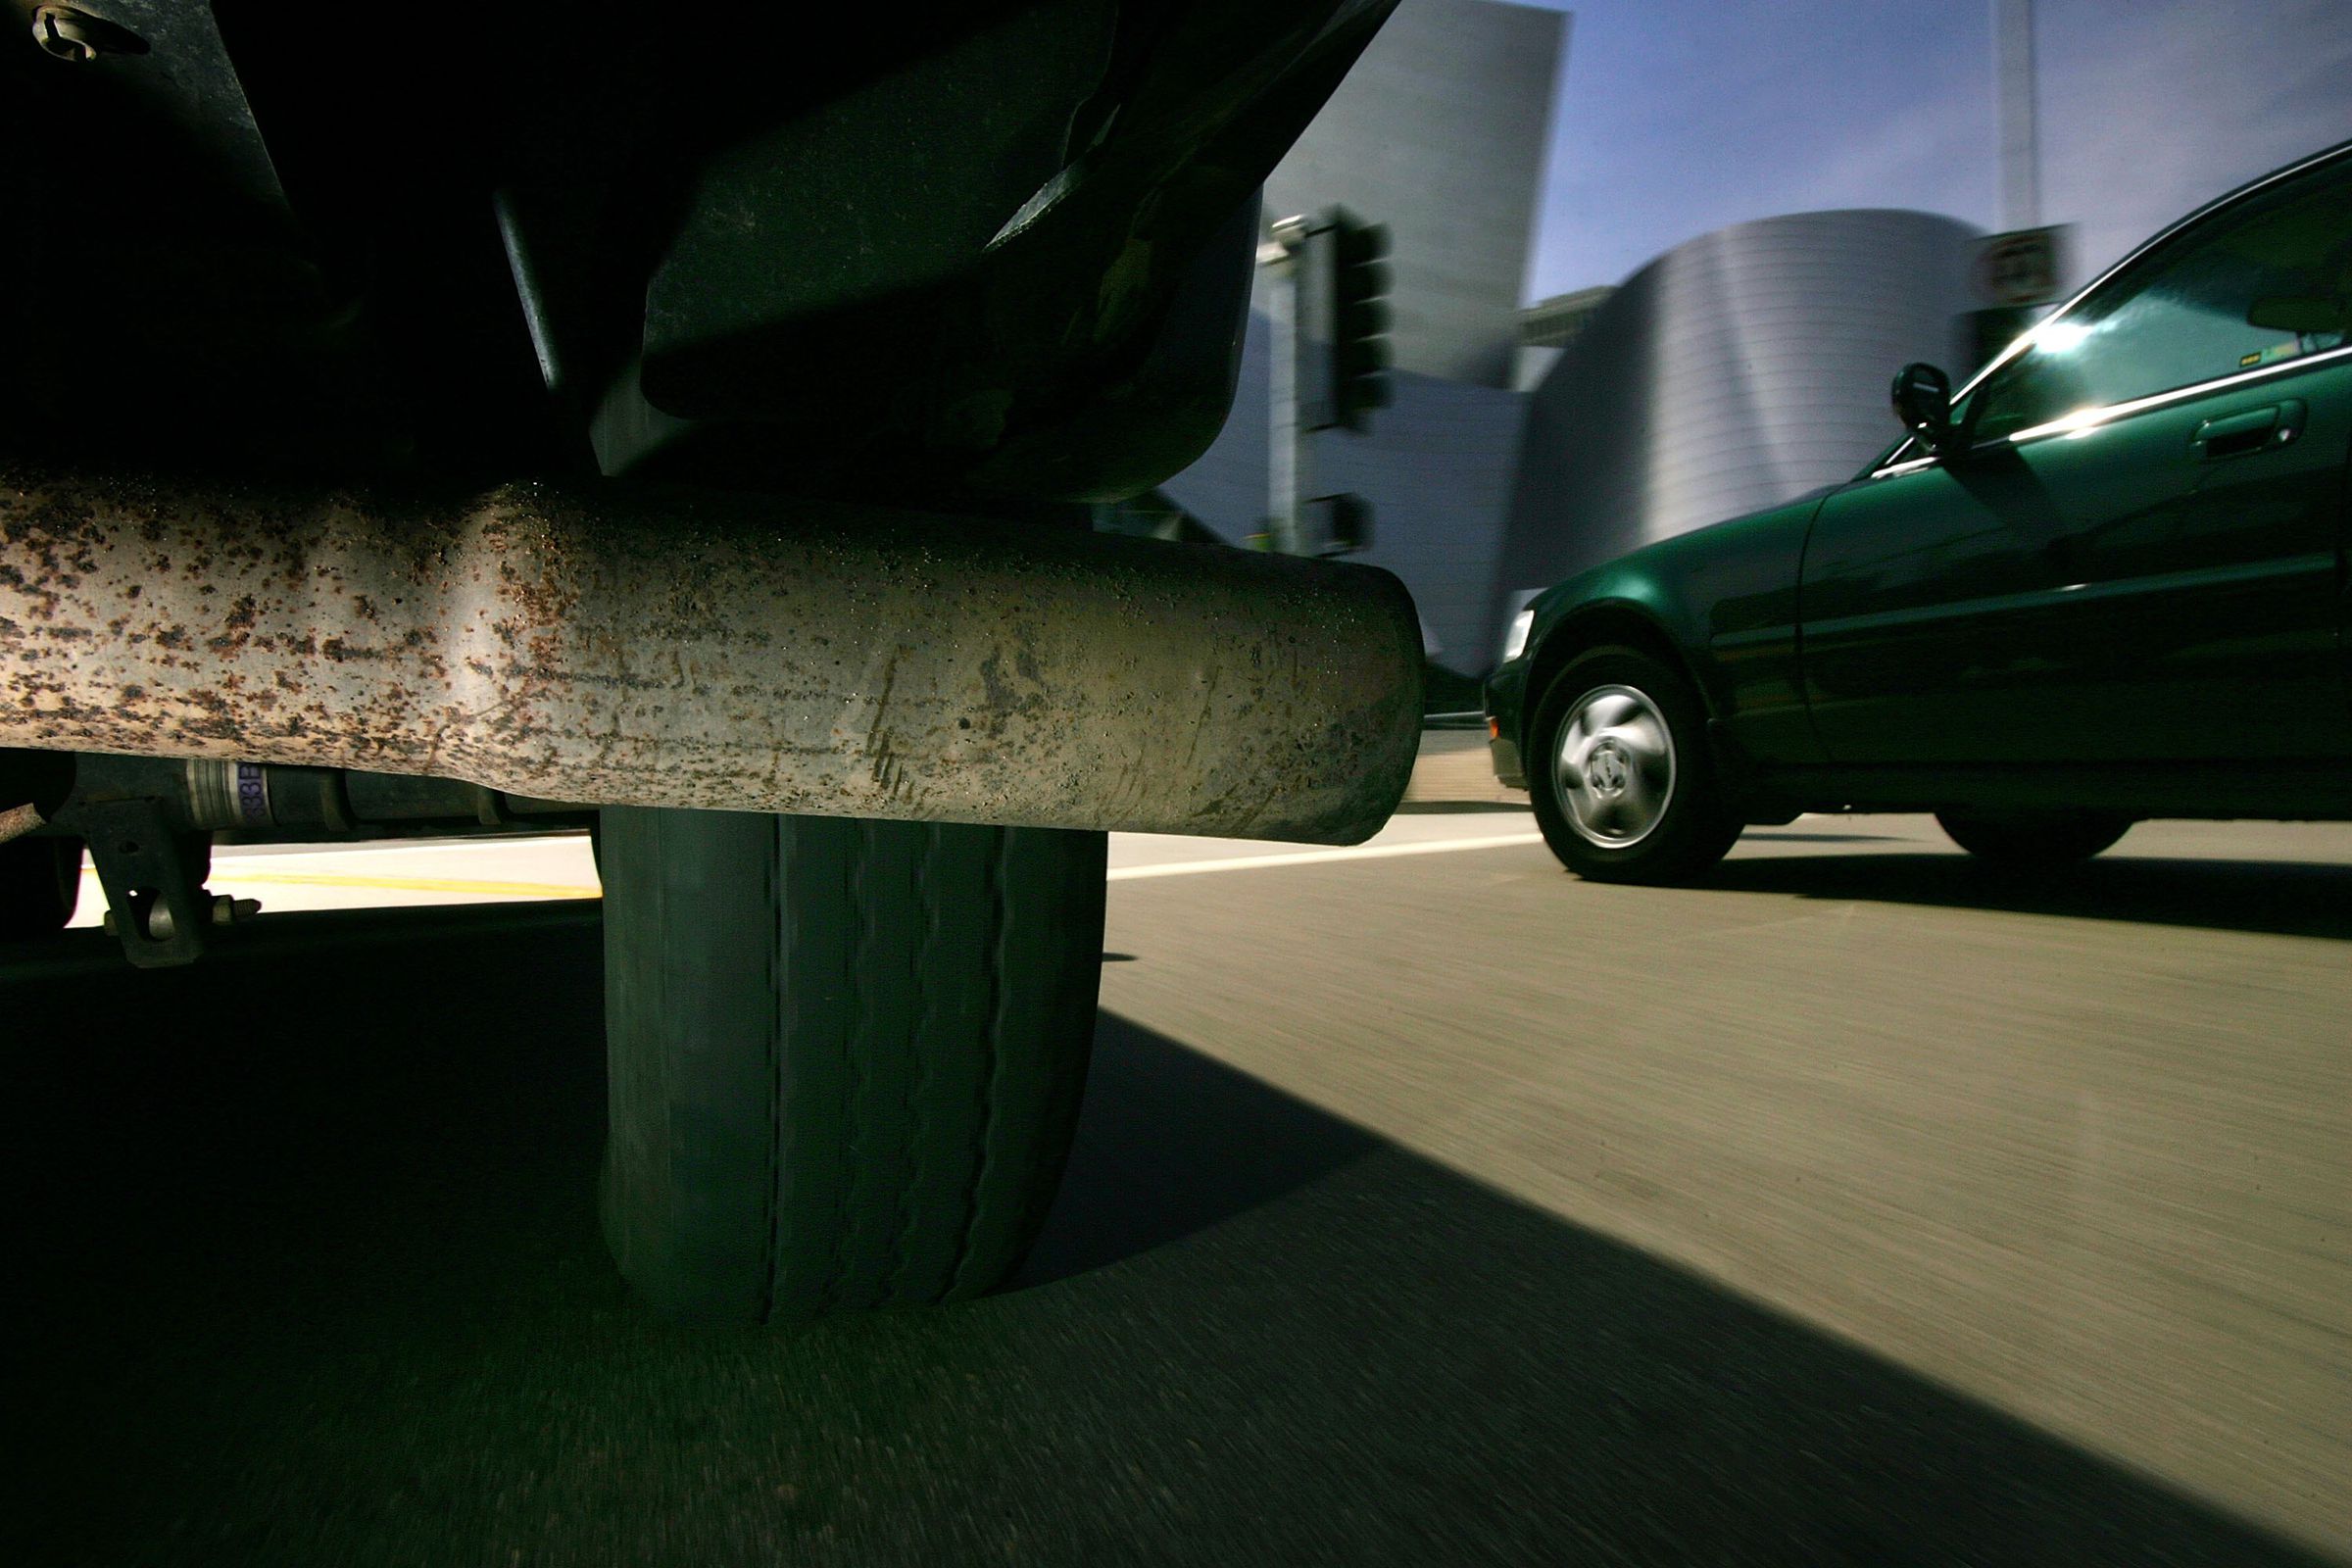 The tailpipe of a vehicle pumping out greenhouse gas emissions is seen next to another car in Los Angeles, CA.